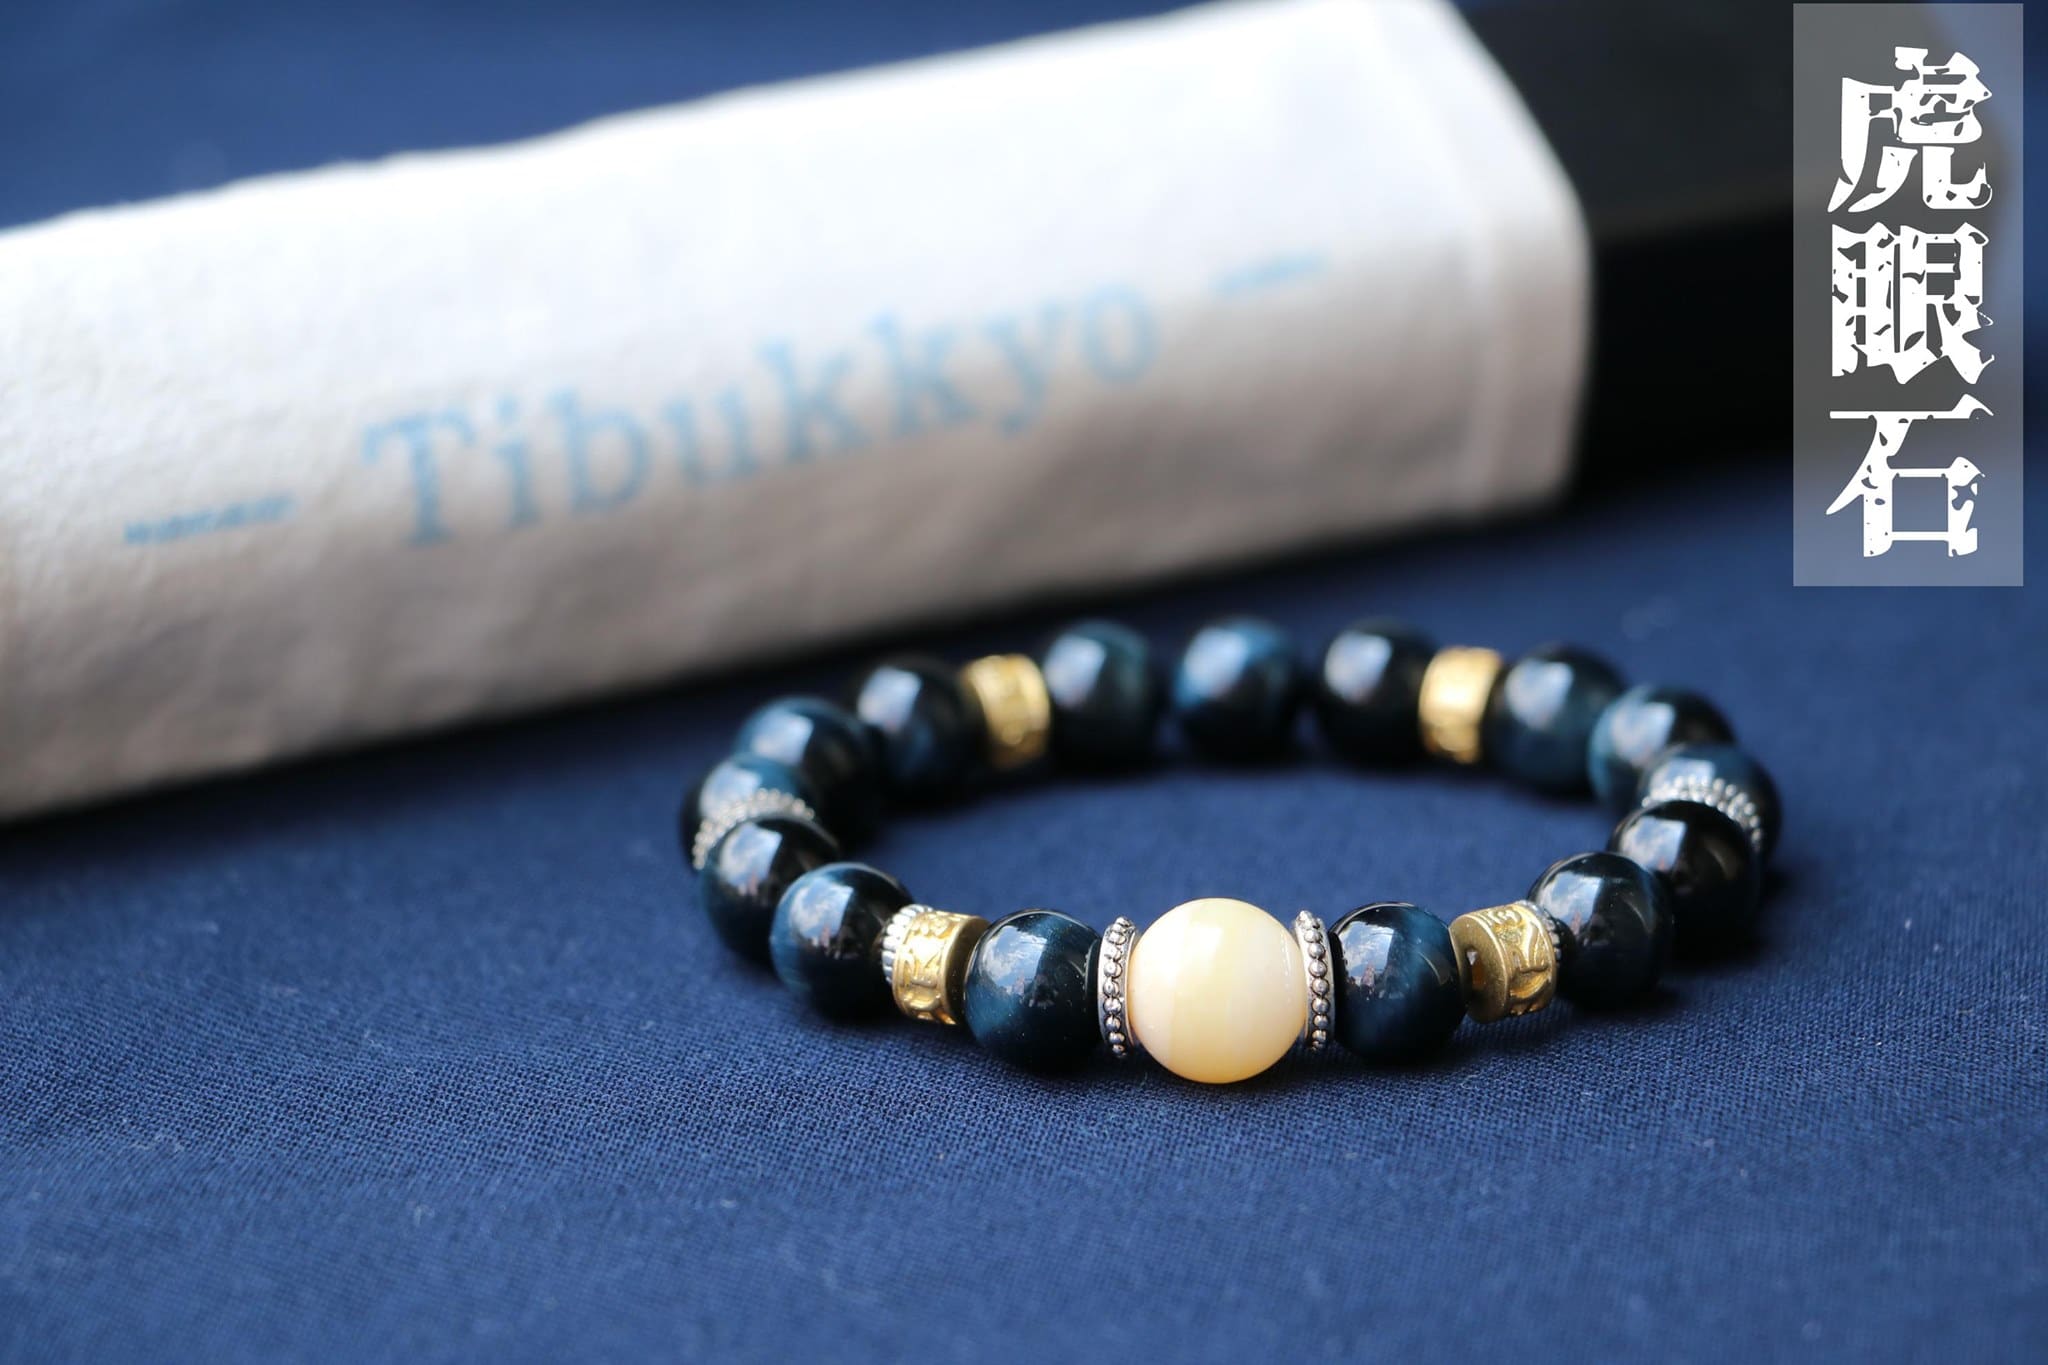 Taiwan Derong Collection｜Original undyed blue tiger eye stone hand beads 10mm｜Filigree beeswax giant clam｜Six-character proverb brass spacer